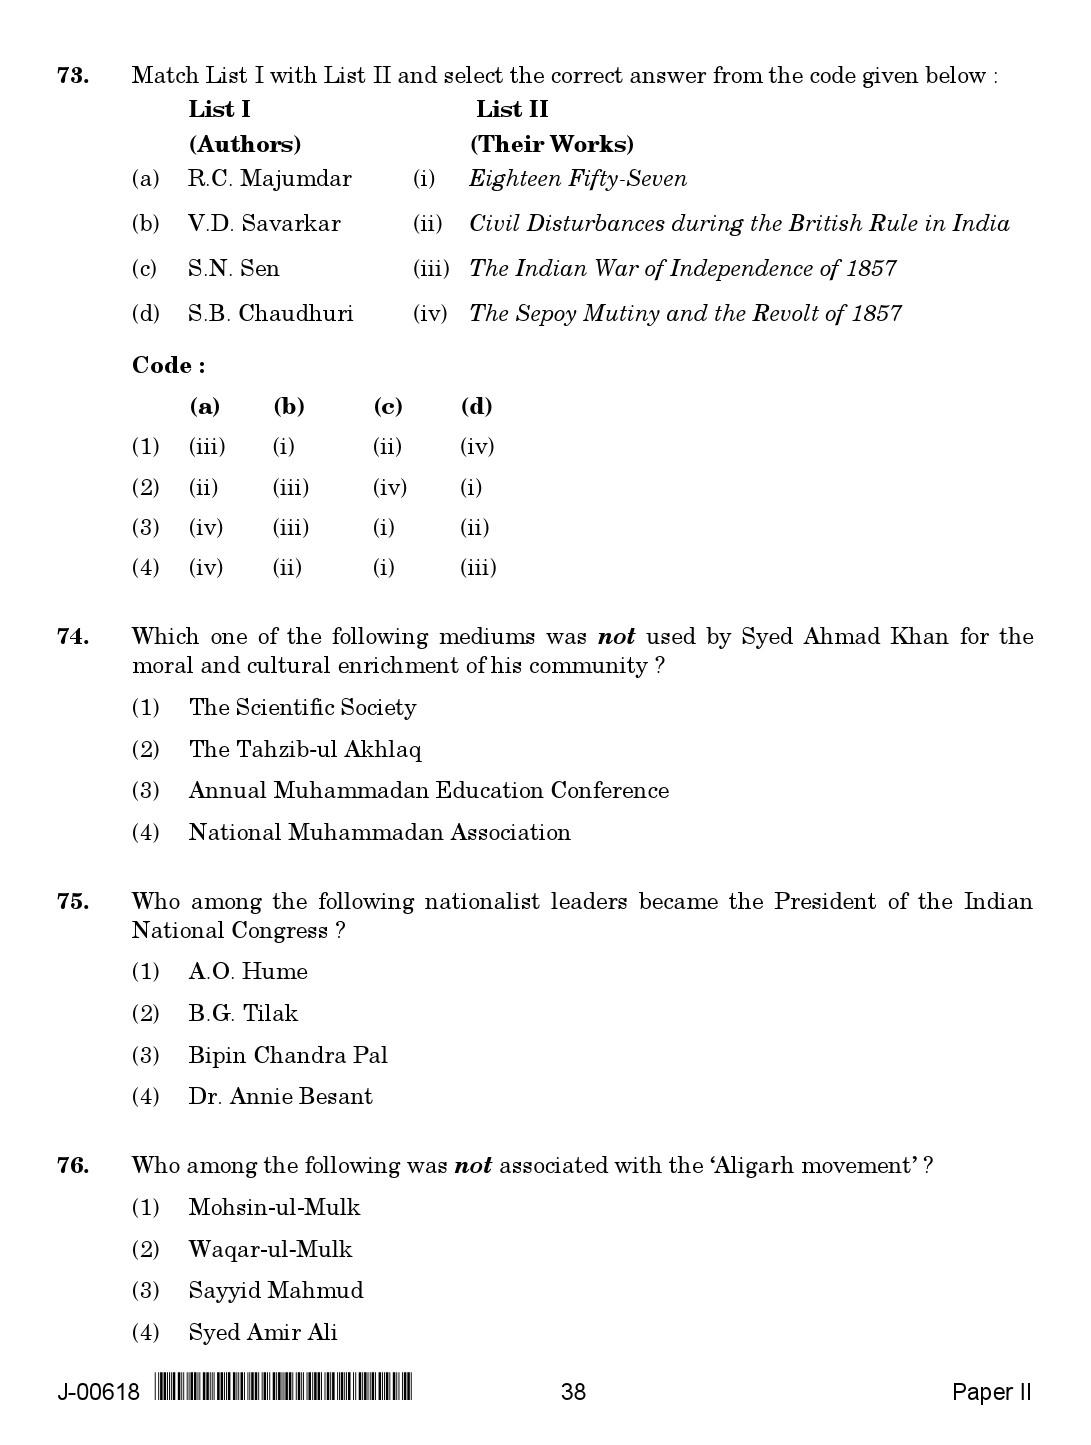 History Question Paper II July 2018 in English 2nd Exam 20